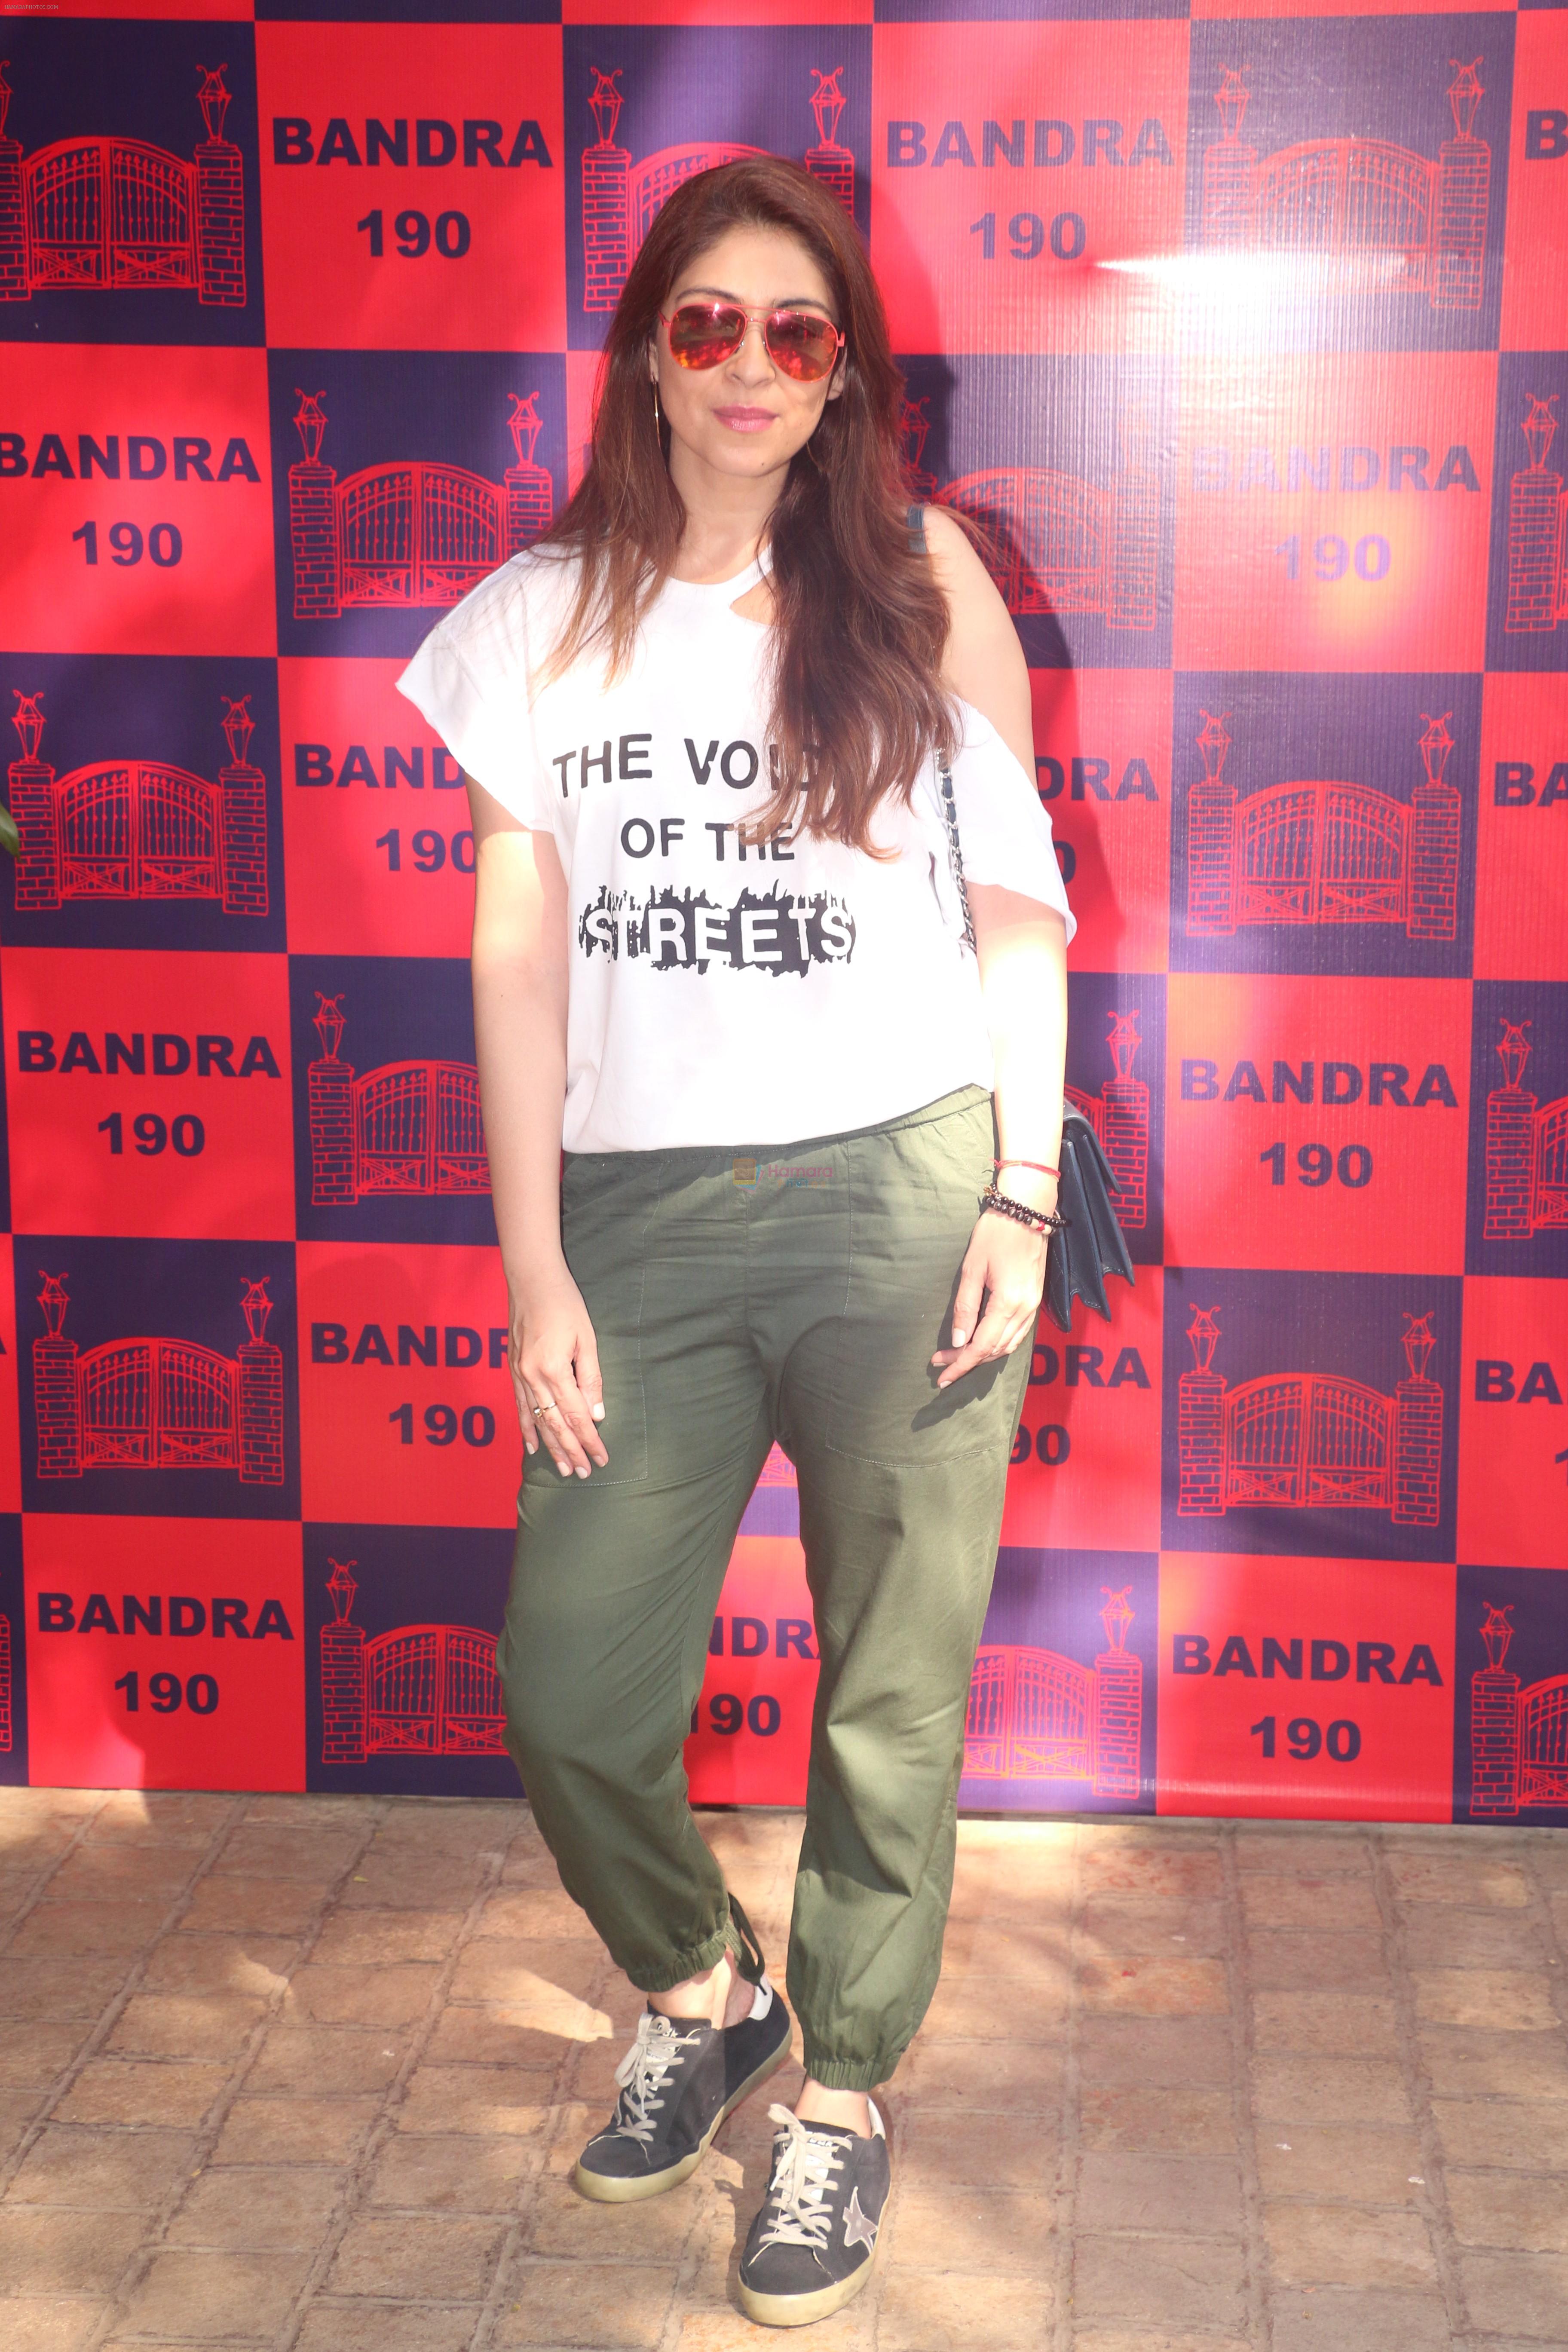 attend a fashion event at Bandra190 on 21st Feb 2019